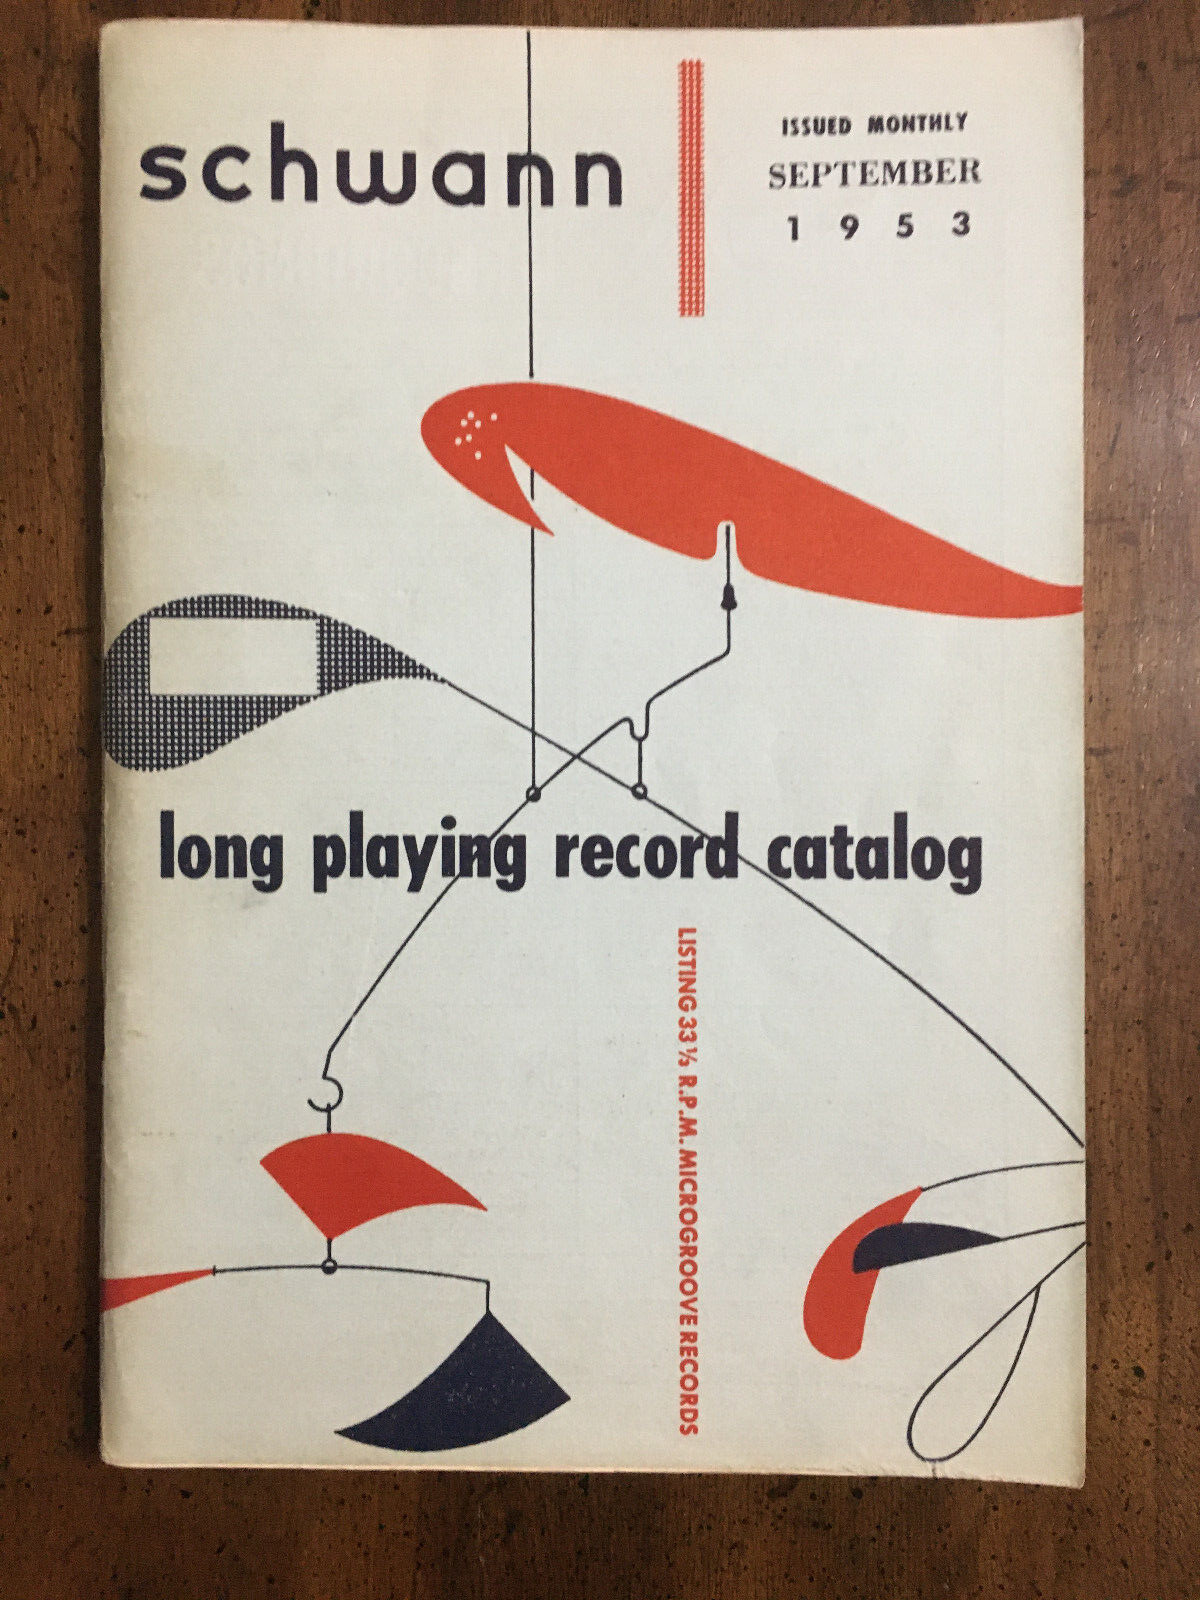 Schwann Long Playing Record Catalog. September, 1953 issue